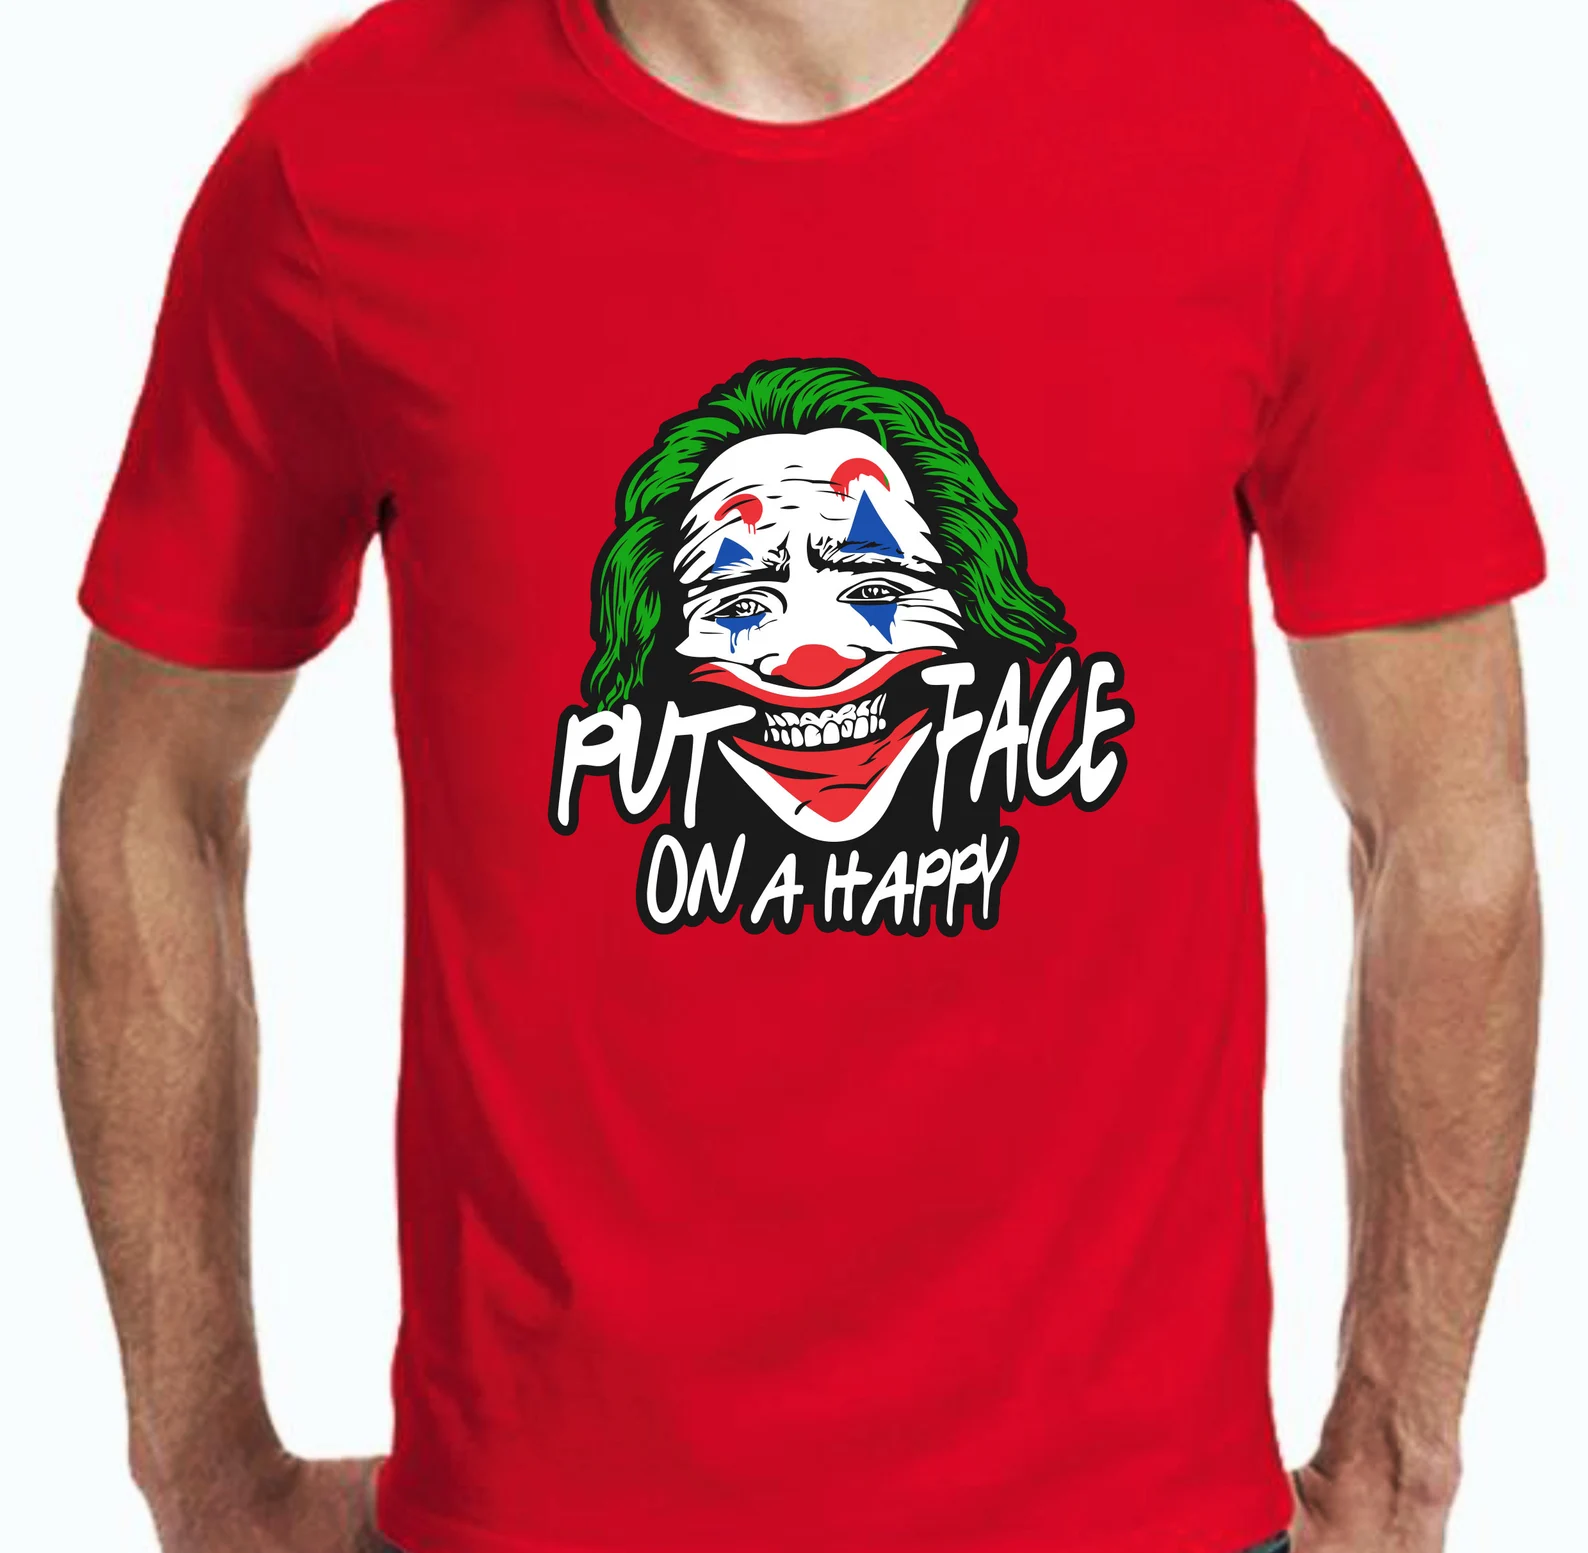 Classic red t-shirt with Joker face.